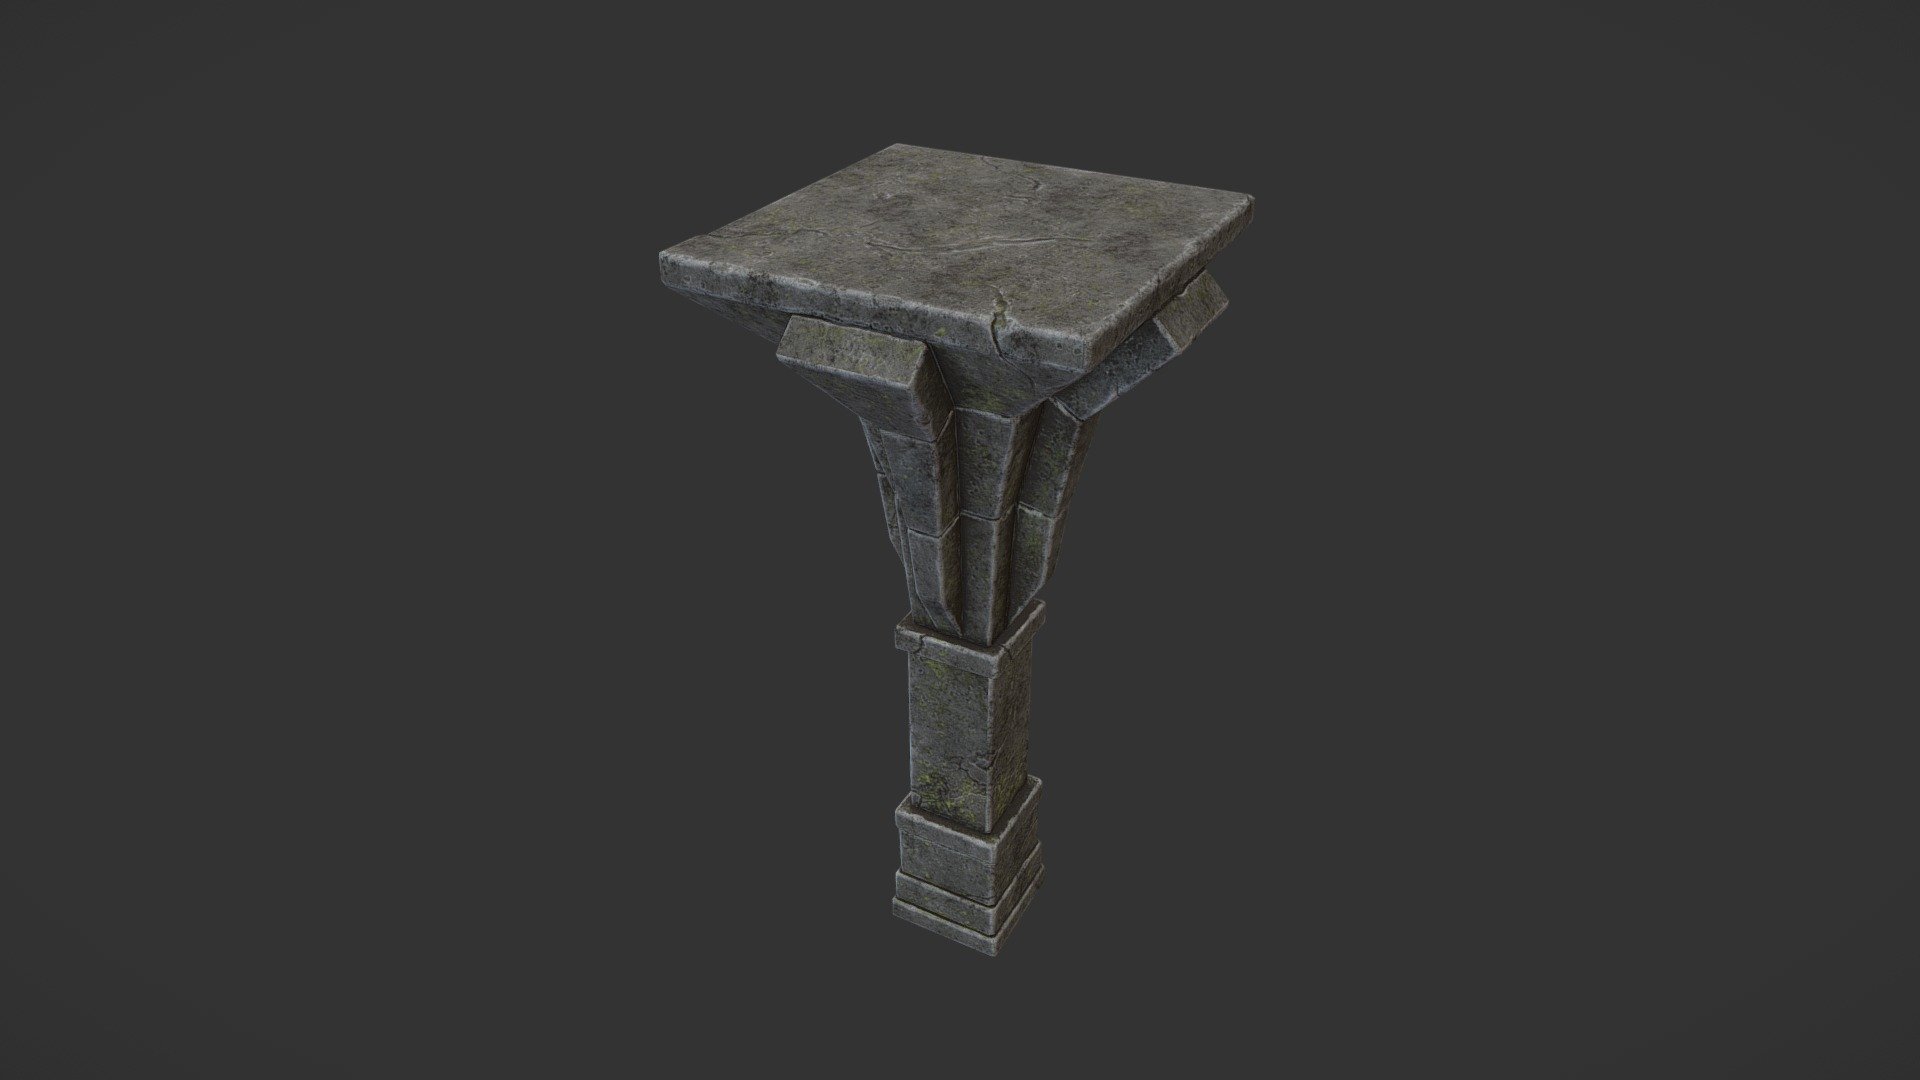 This is a new props for Unity3D package “Dungeon”. PBR material 3d model